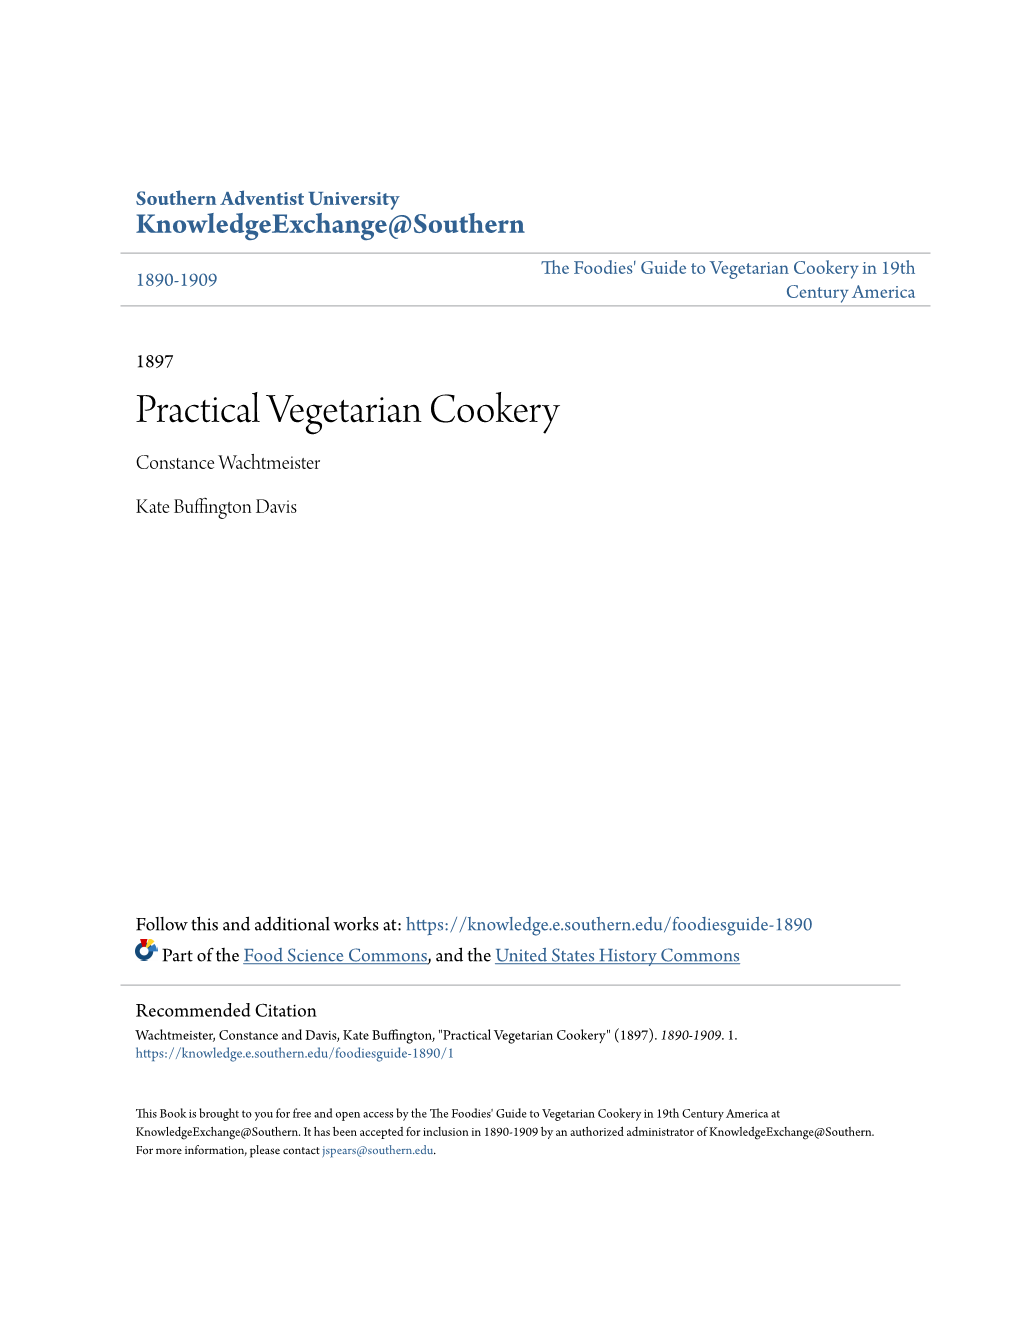 Practical Vegetarian Cookery Constance Wachtmeister